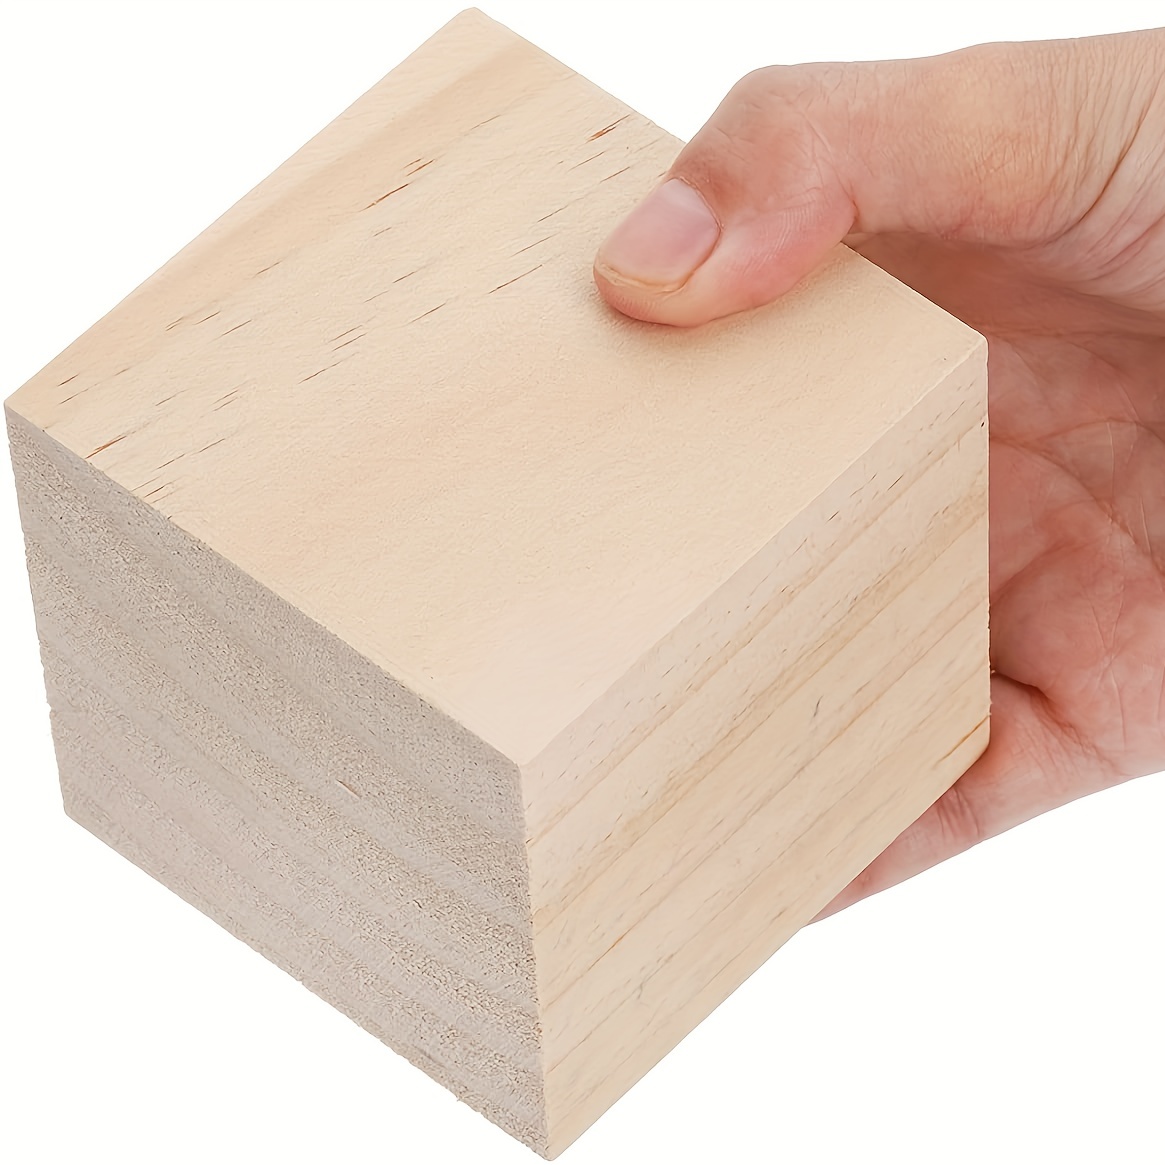 Wooden Cubes for Crafts